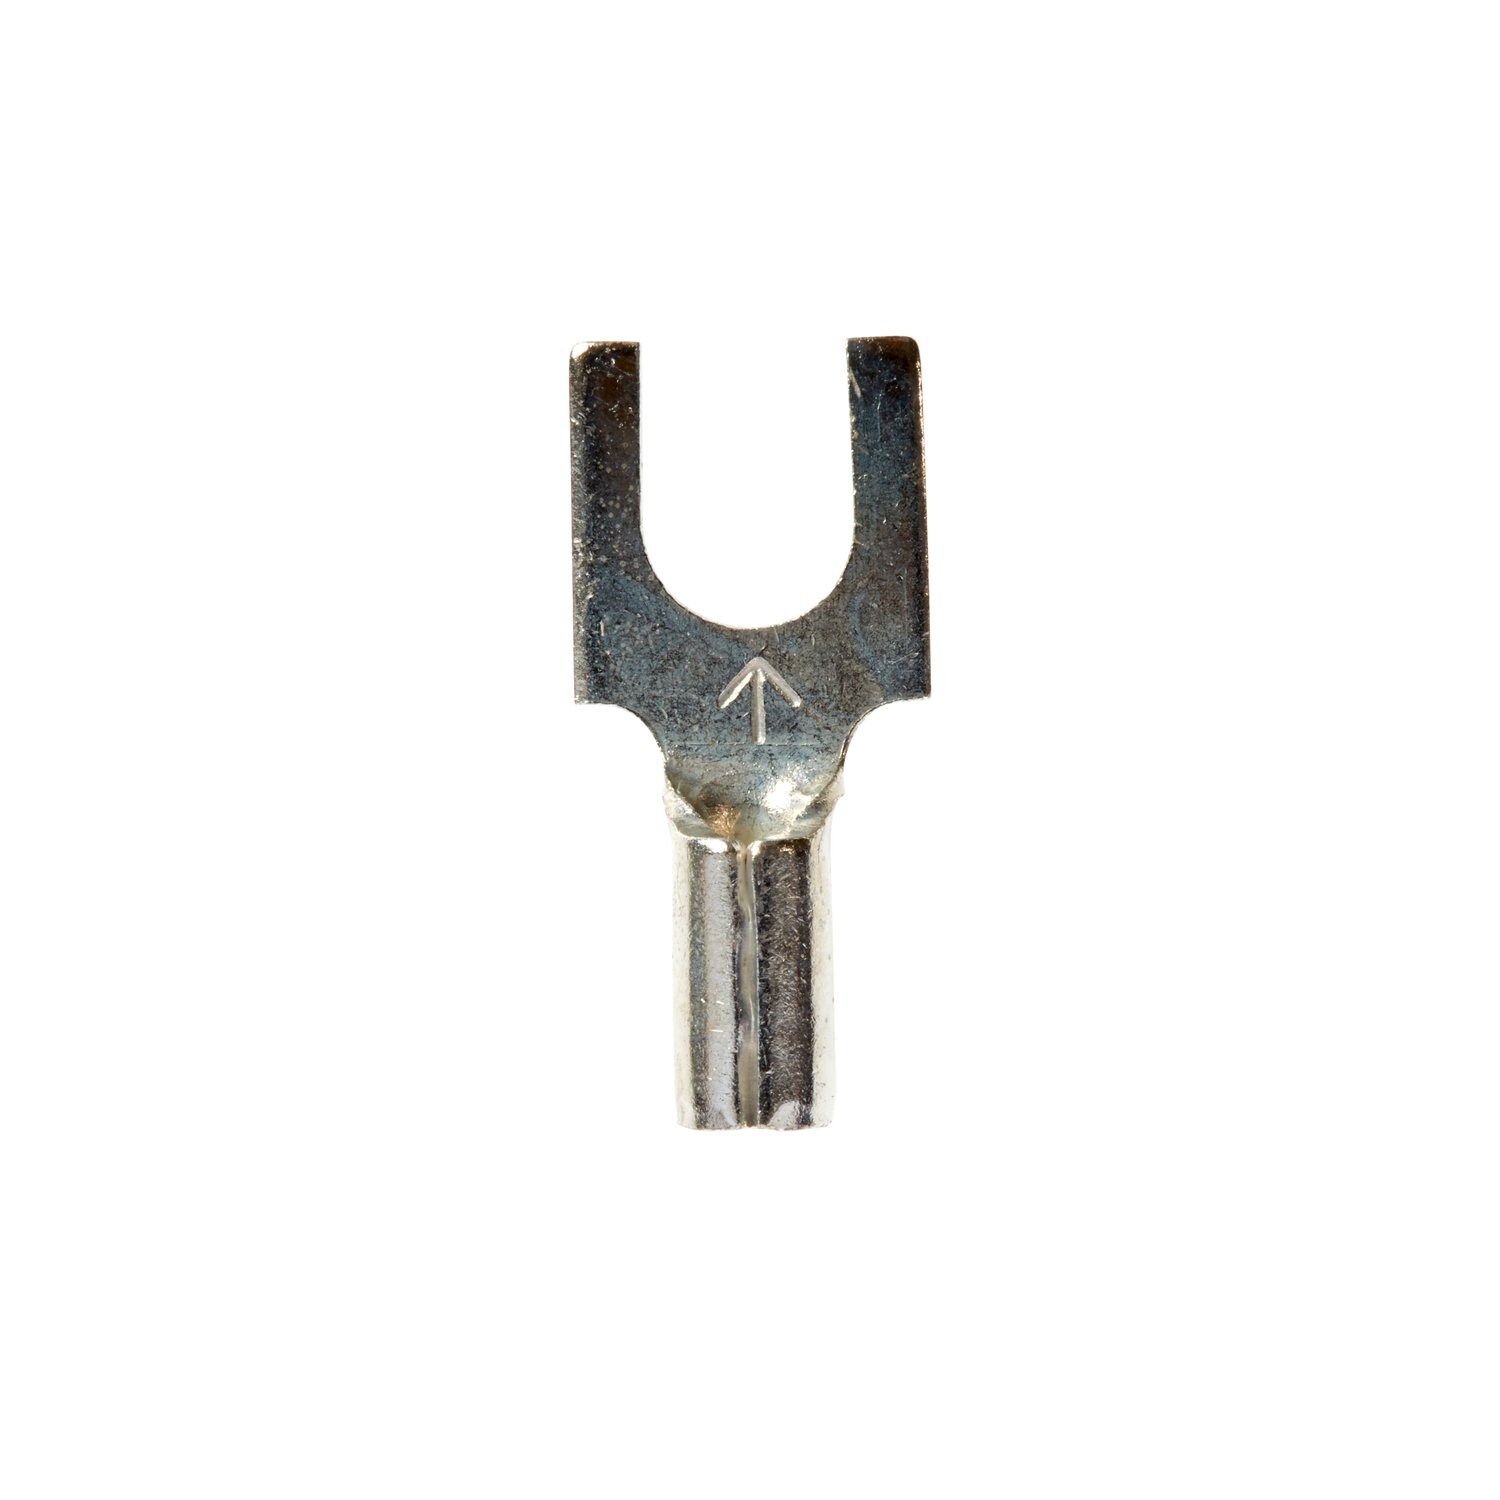 7100163946 - 3M Scotchlok Block Fork, Non-Insulated Butted Seam MU18-8FBK, Stud
Size 8, suitable for use in a terminal block, 1000/Case